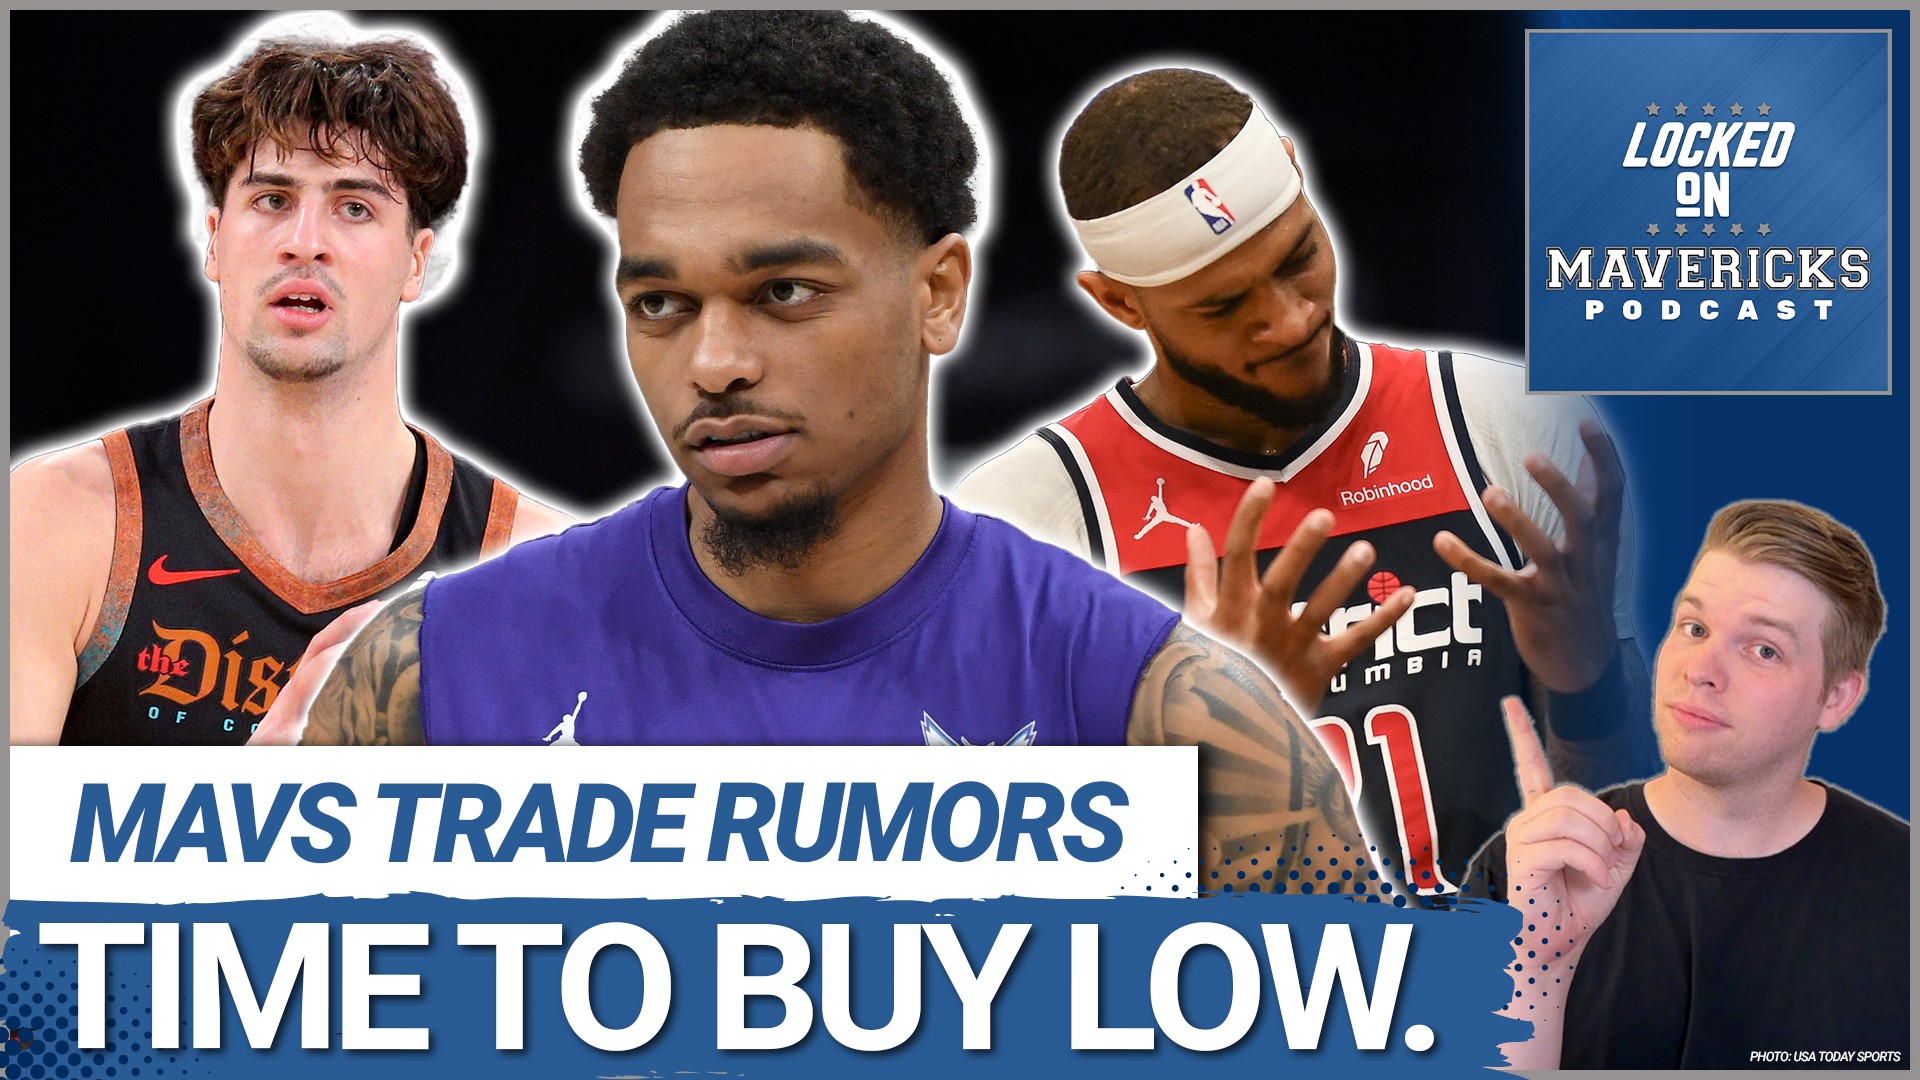 Nick Angstadt discusses the Dallas Mavericks Trade Rumors and why the Mavs should buy low on PJ Washington. Is Herb Jones a possibility?